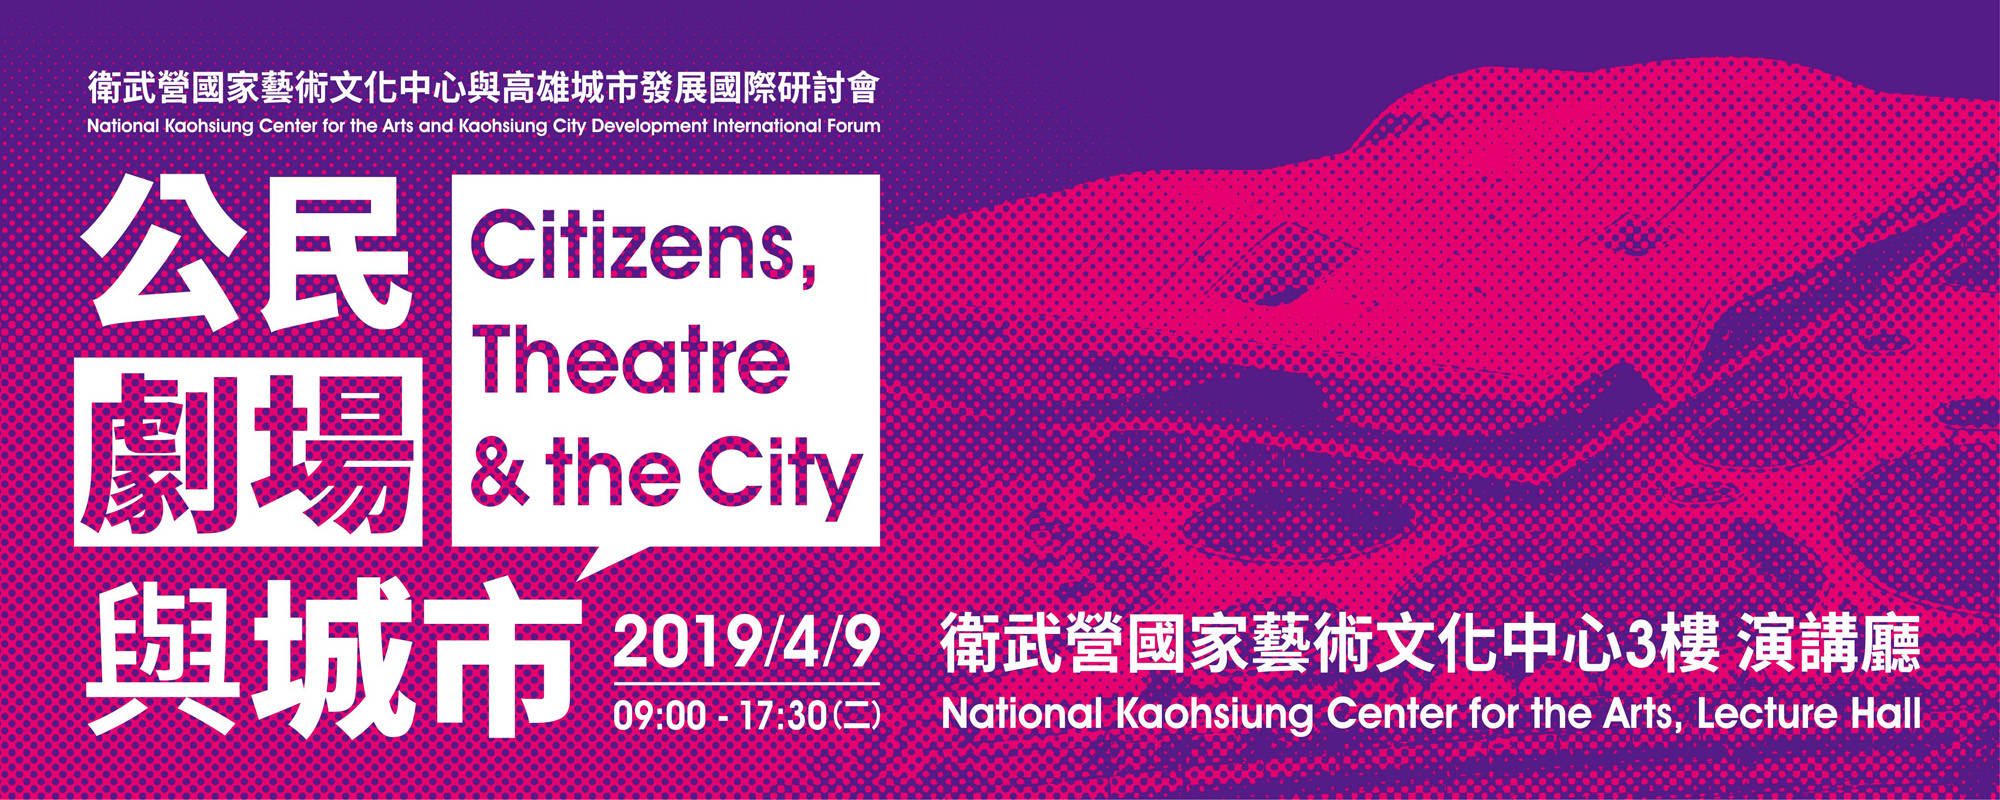 Citizens, Theatre and the City- National Kaohsiung Center for the Arts and Kaohsiung City Development International Forum